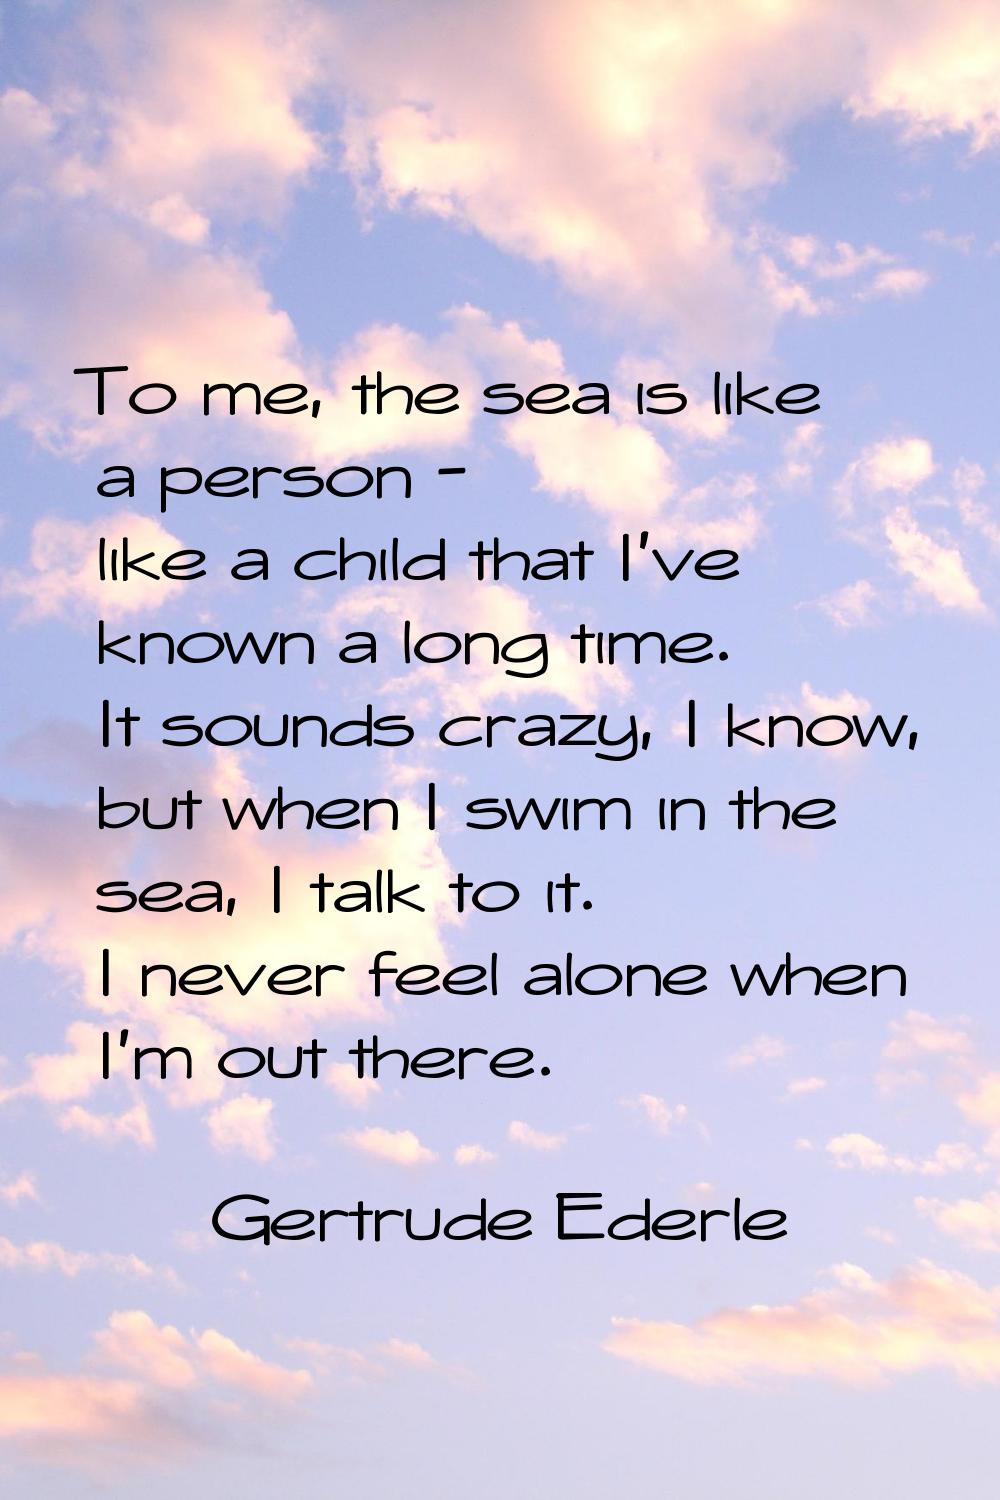 To me, the sea is like a person - like a child that I've known a long time. It sounds crazy, I know